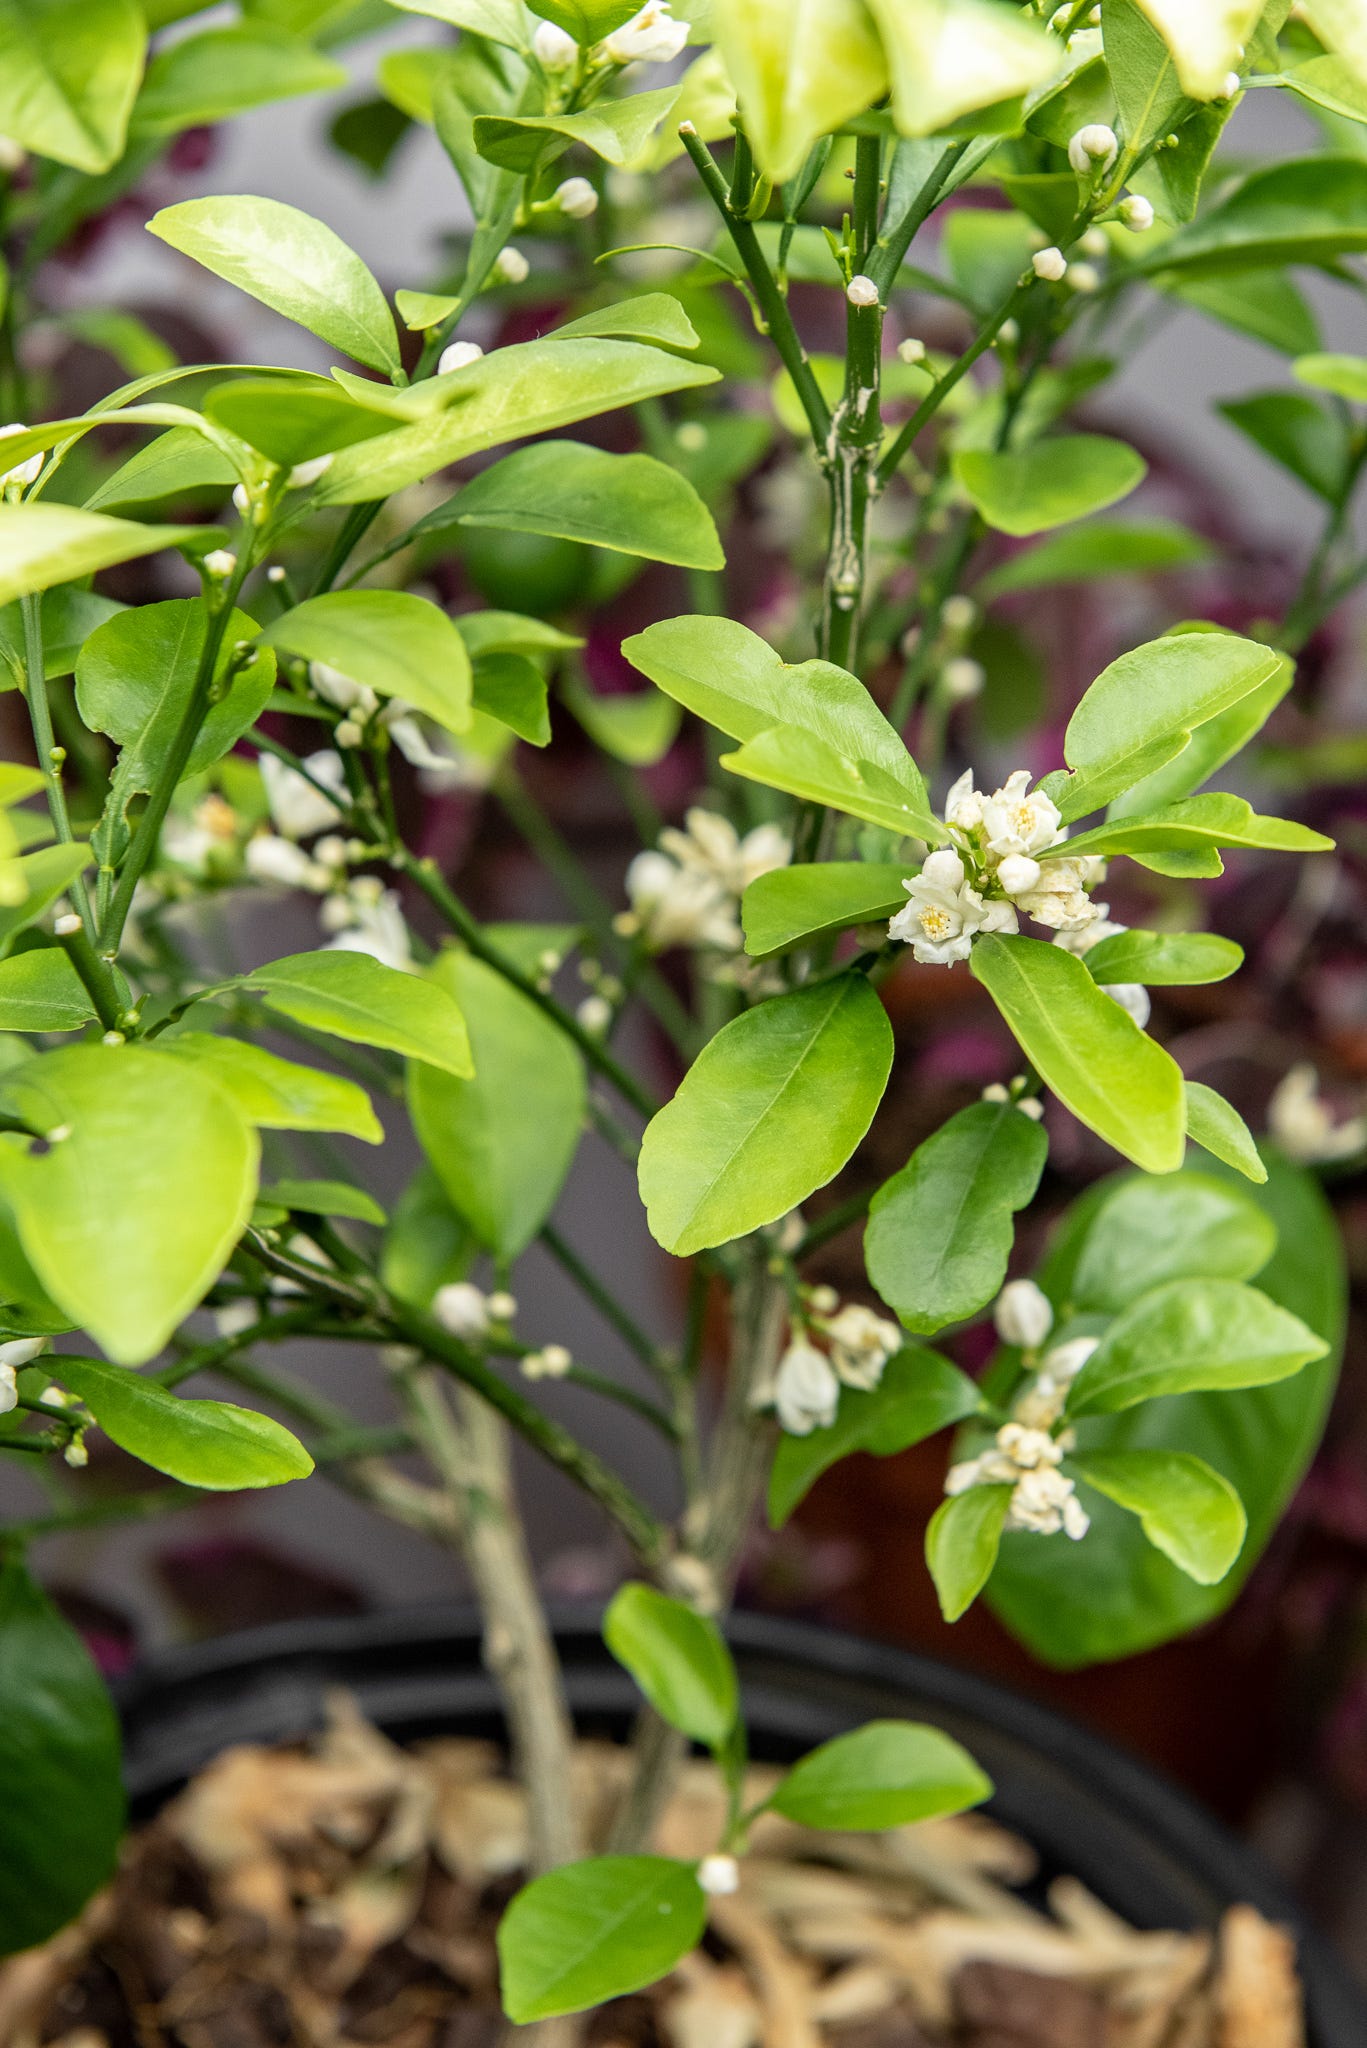 ID: Close up view of calamansi tree with many white flower buds